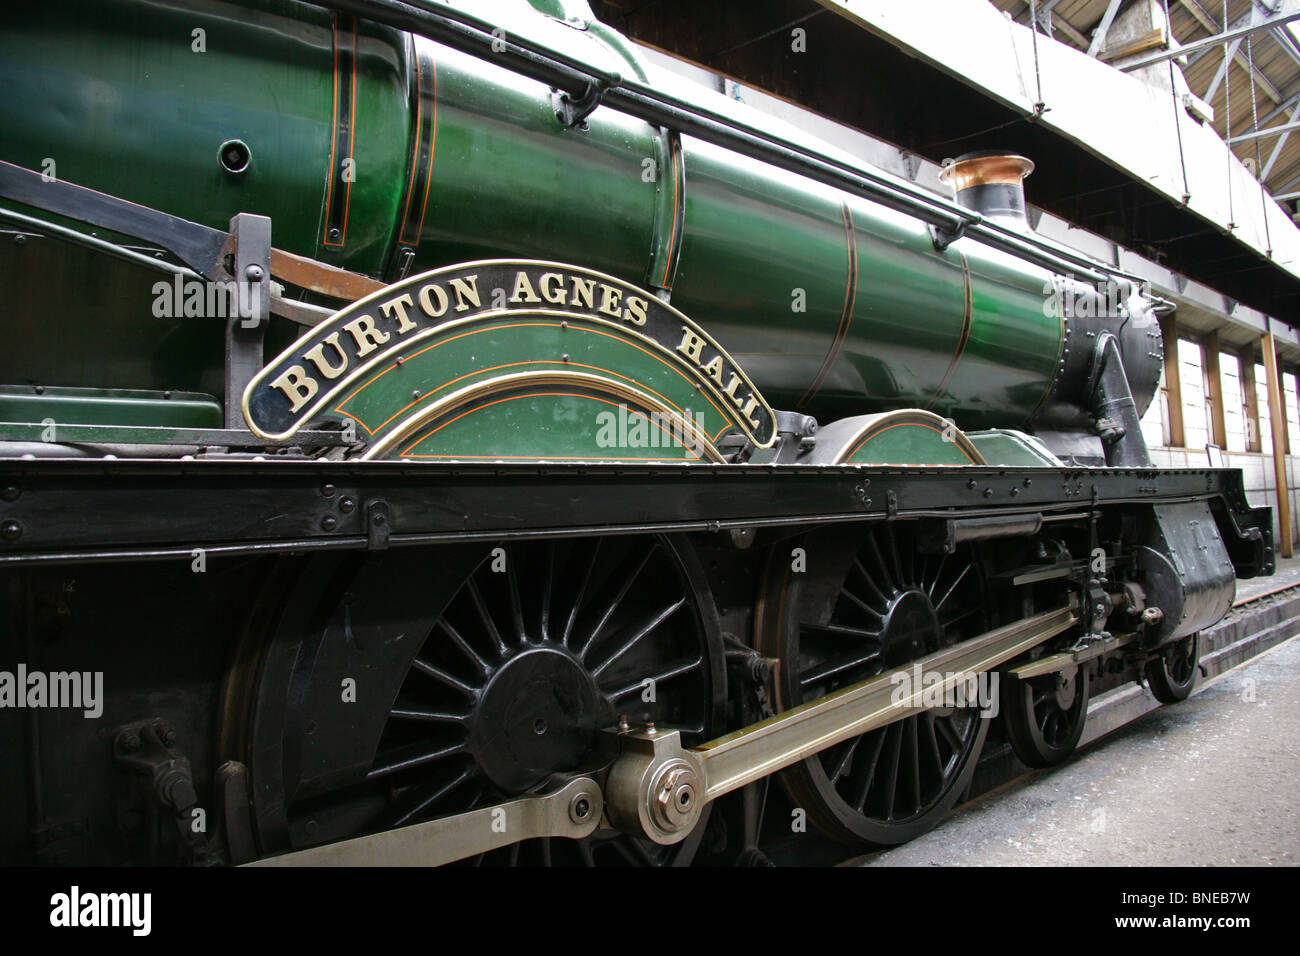 Great Western Railway GWR 6998 'Burton Agnes' Locomotive, Didcot Railway Centre and Museum, Didcot, Oxfordshire. Stock Photo